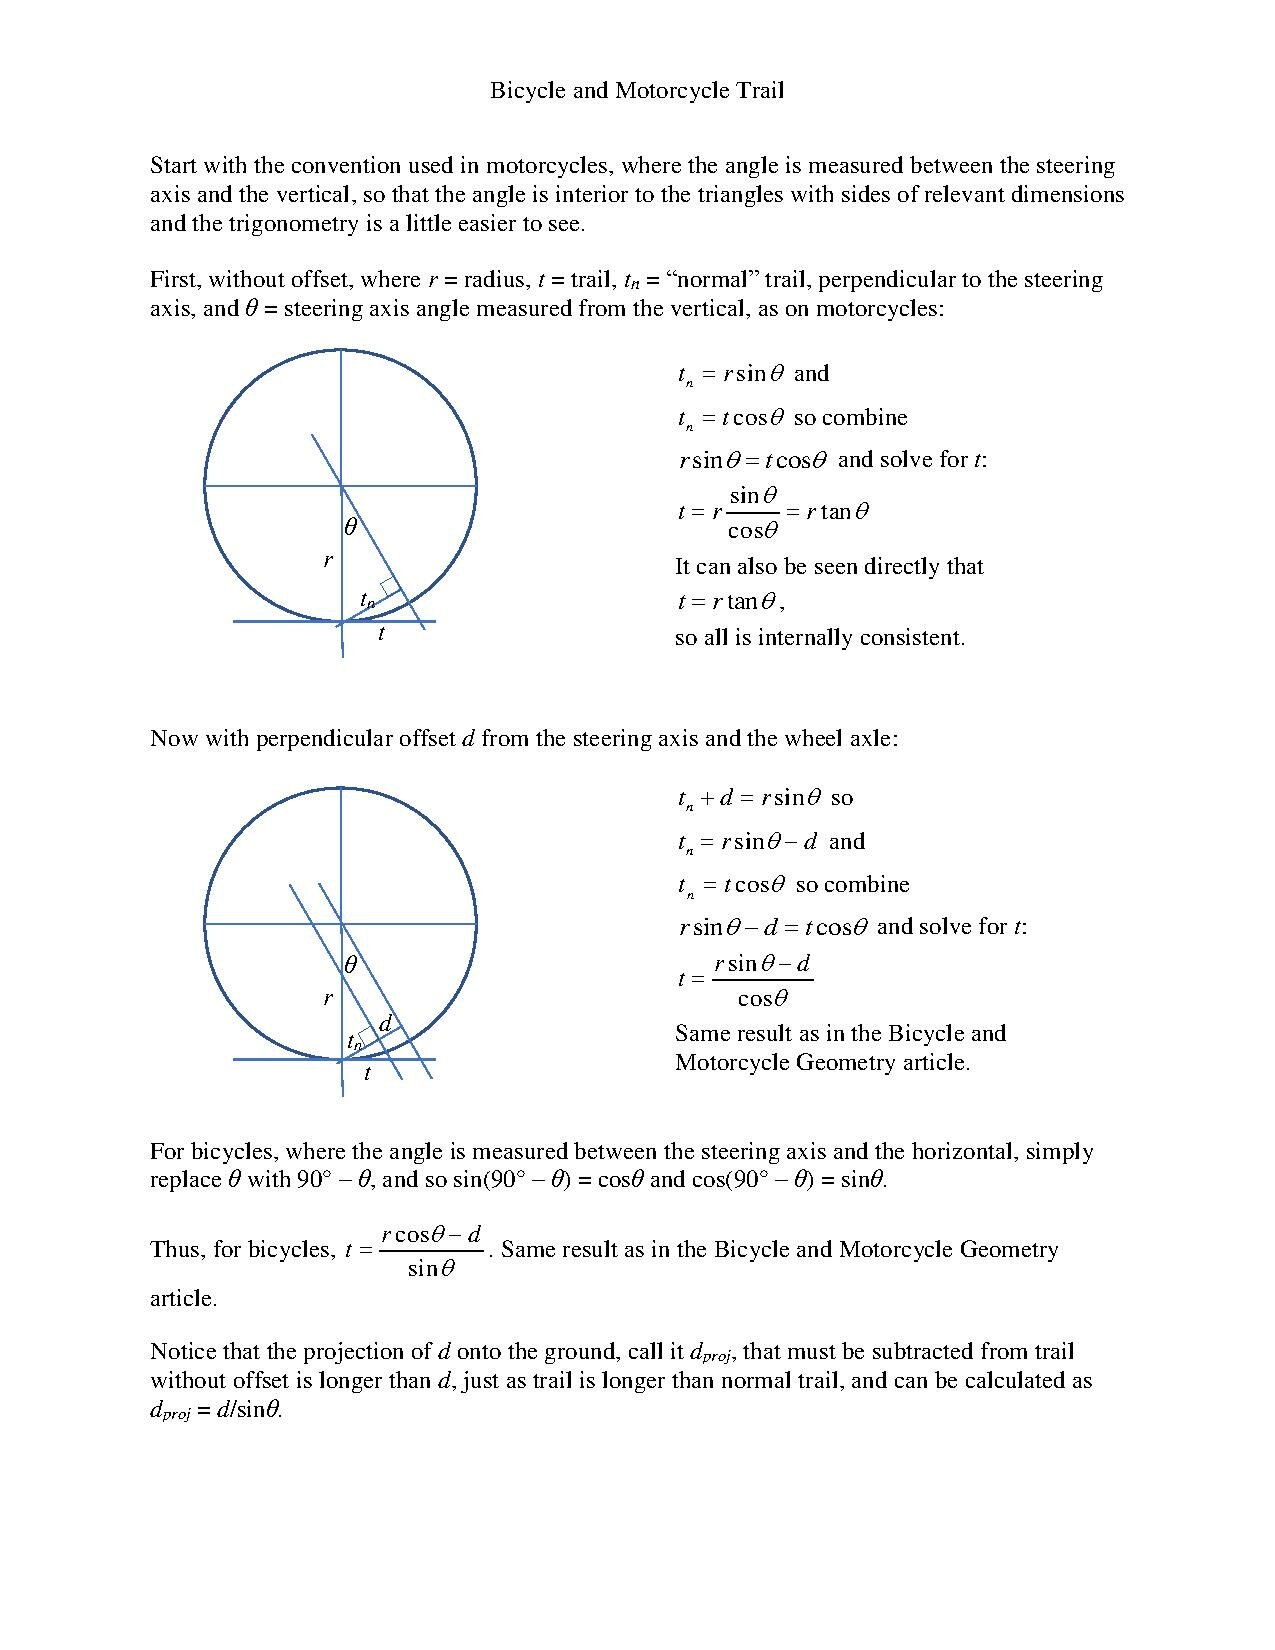 A derivation of the expressions for calculating bicycle and motorcycle trail from wheel radius, steering axis angle, and fork offset